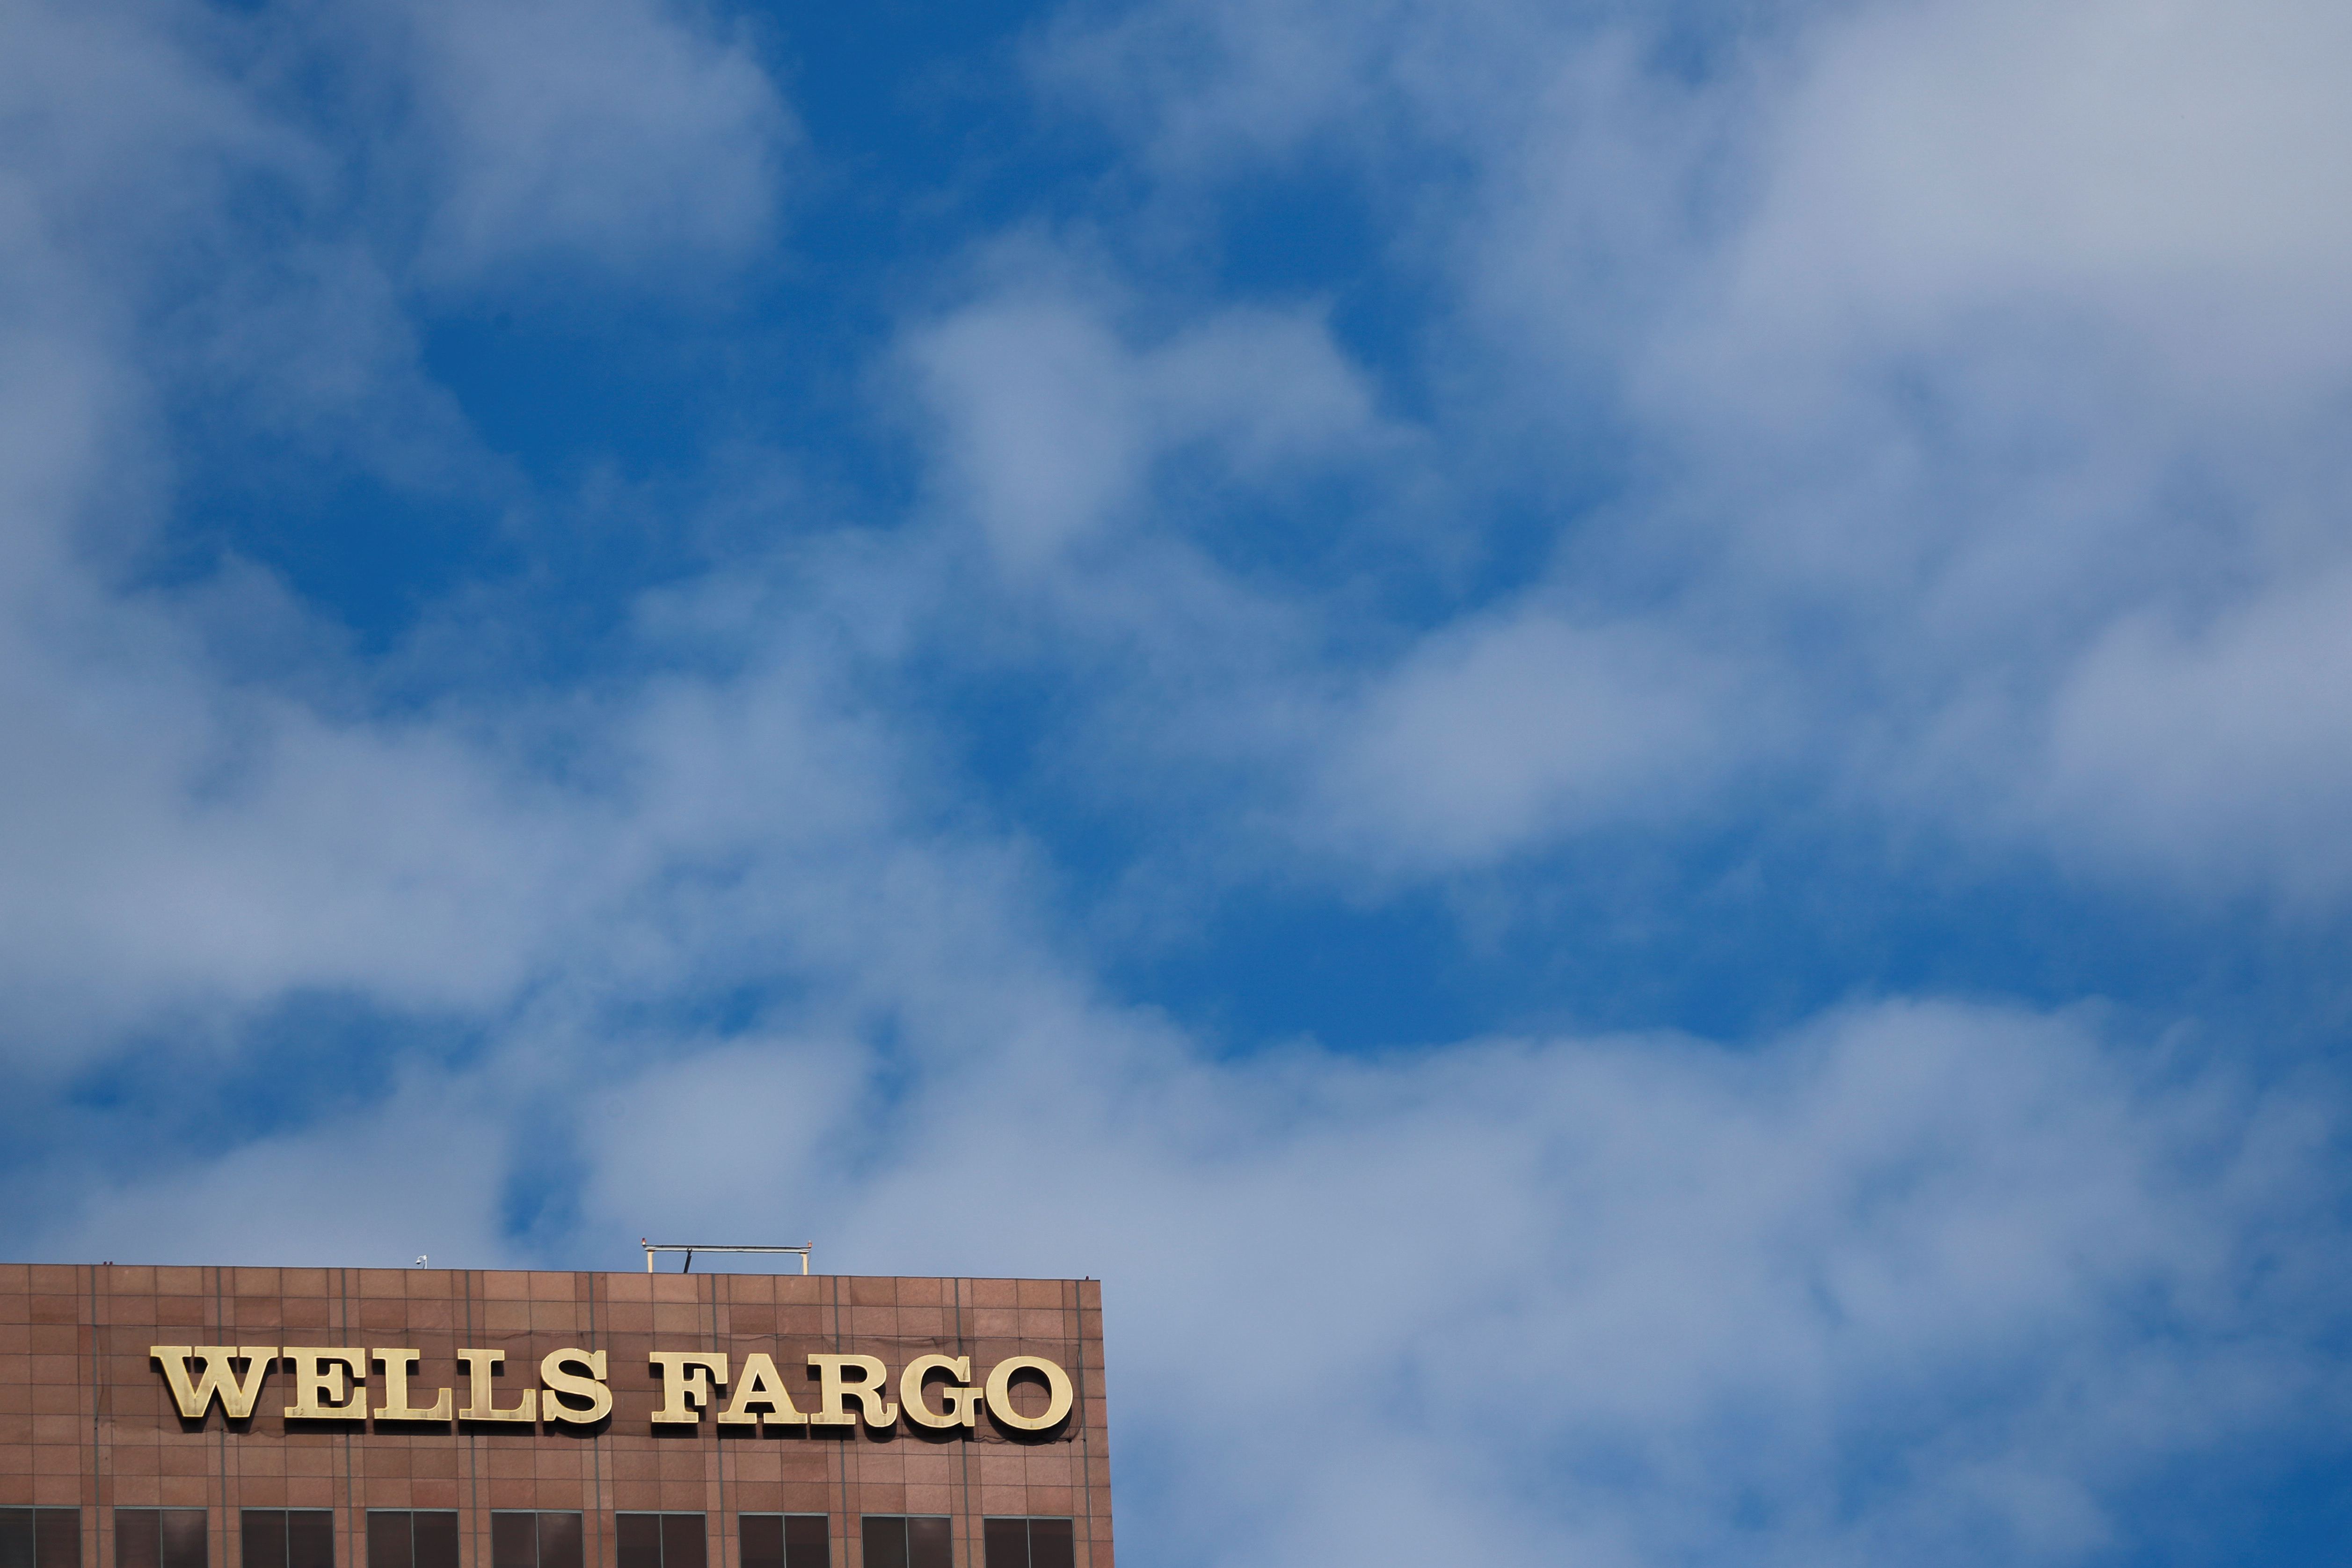 The Wells Fargo name is shown on an office town in downtown Los Angeles